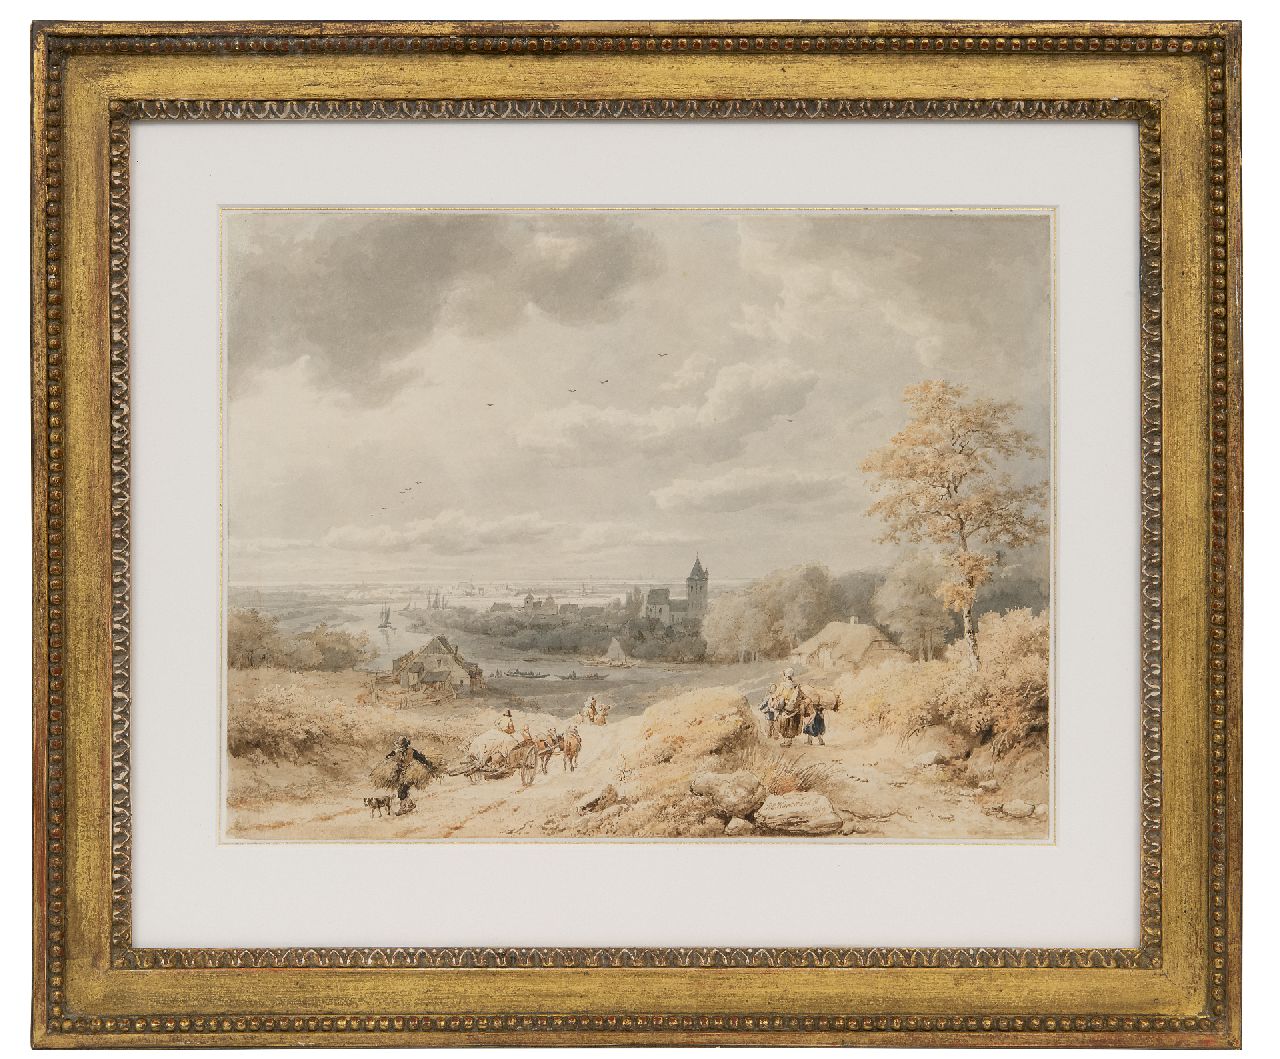 Koekkoek B.C.  | Barend Cornelis Koekkoek | Watercolours and drawings offered for sale | A view of the river Rhine near Kleve, pen, brush and ink on paper 23.5 x 31.1 cm, signed l.c. and dated 1849